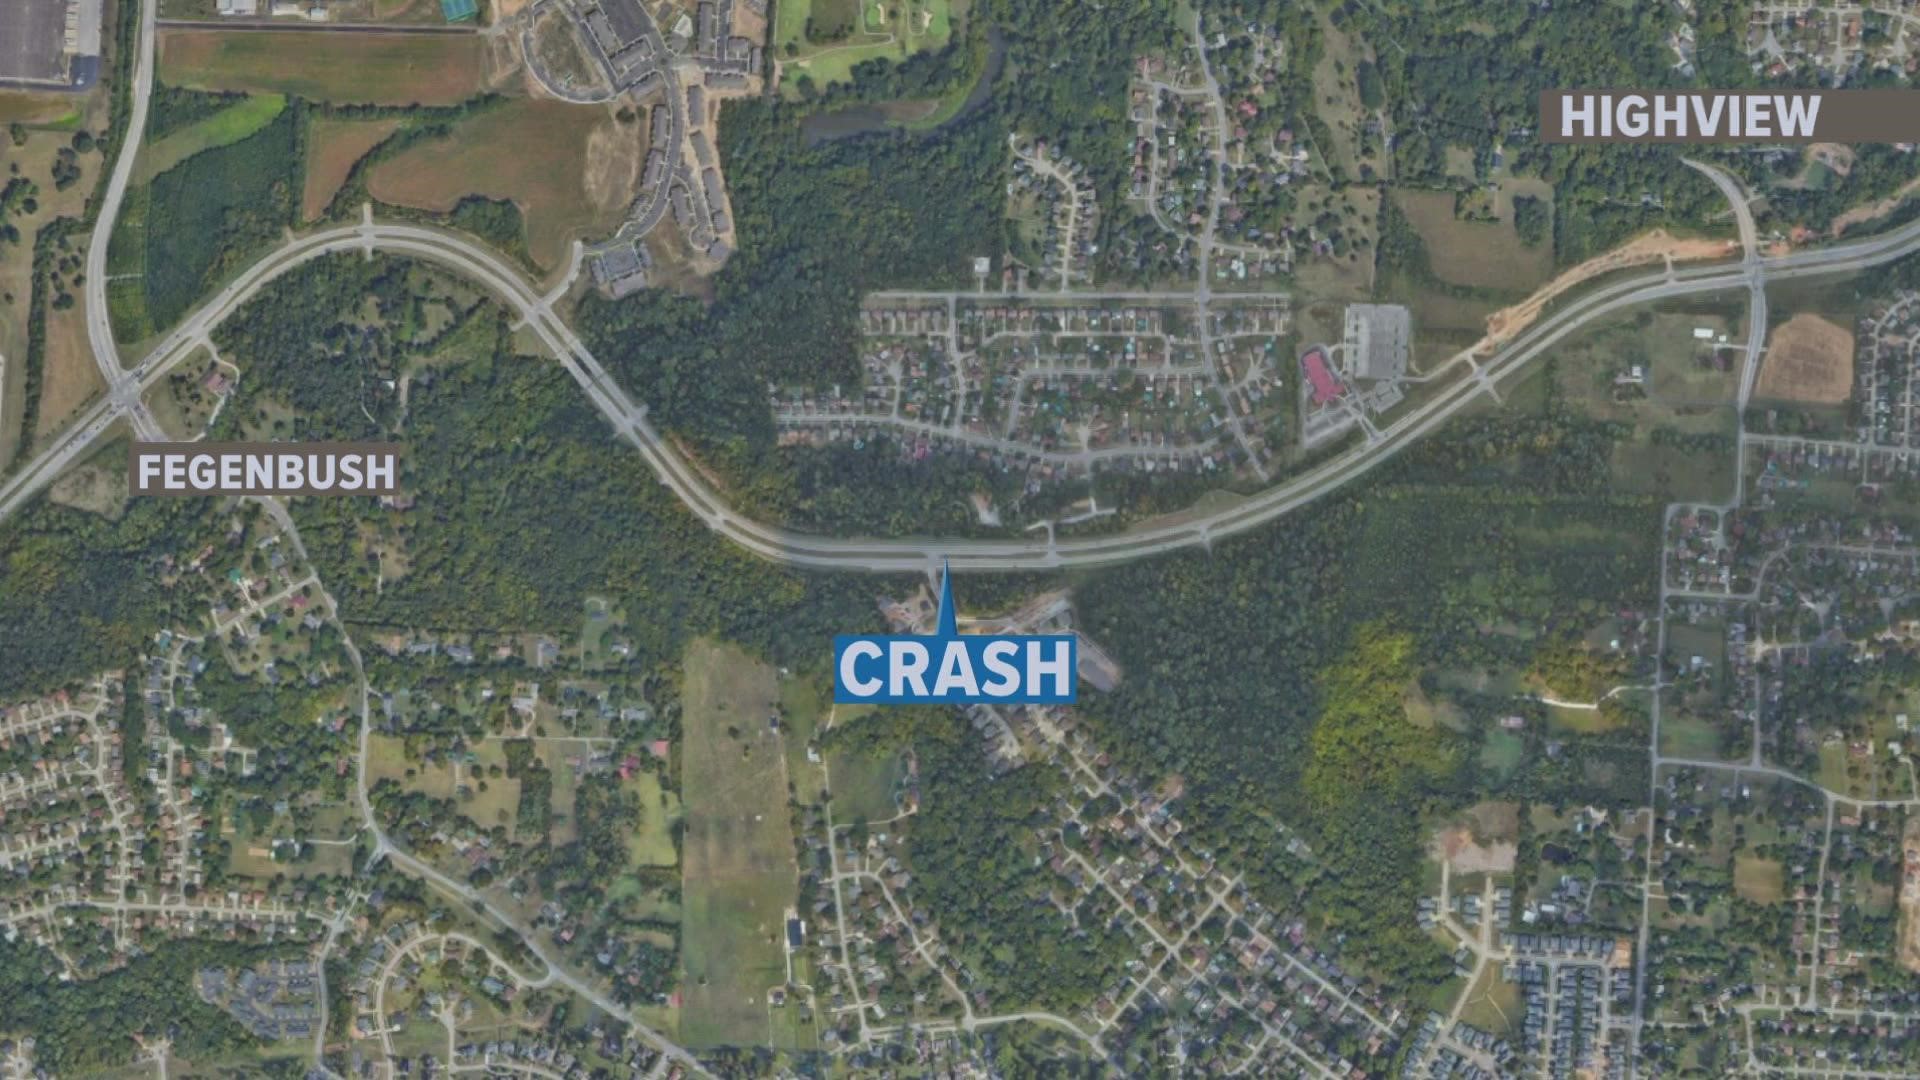 Louisville Metro Police said the accident occurred on South Hurstbourne Parkway near Vassel Road in Highview.